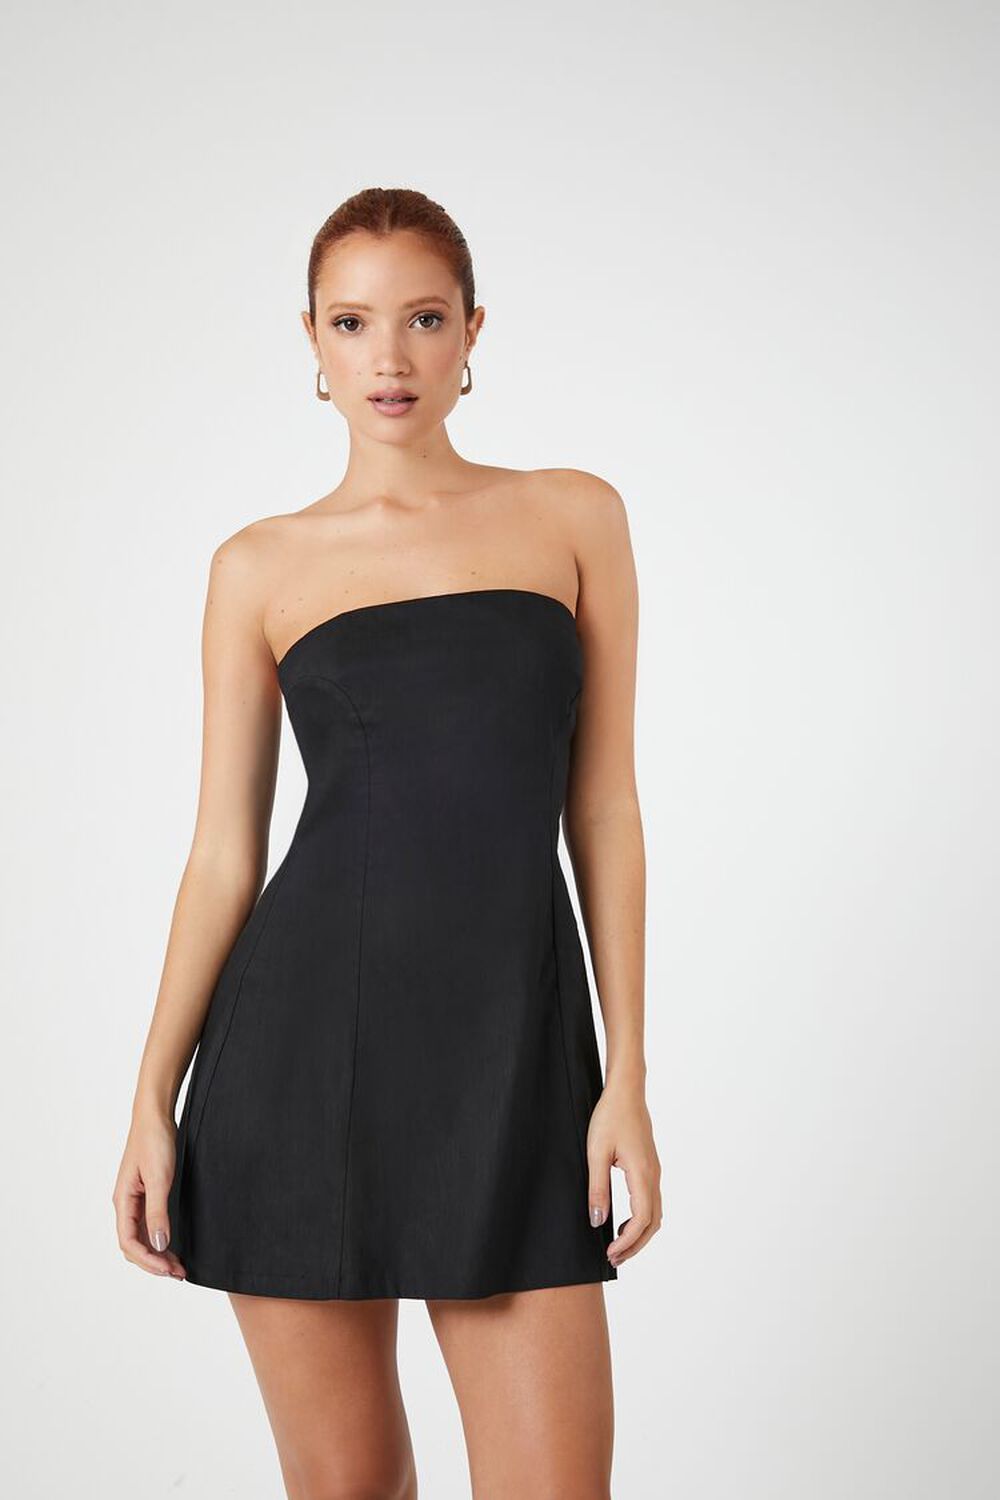 21+ Strapless Fit And Flare Dress